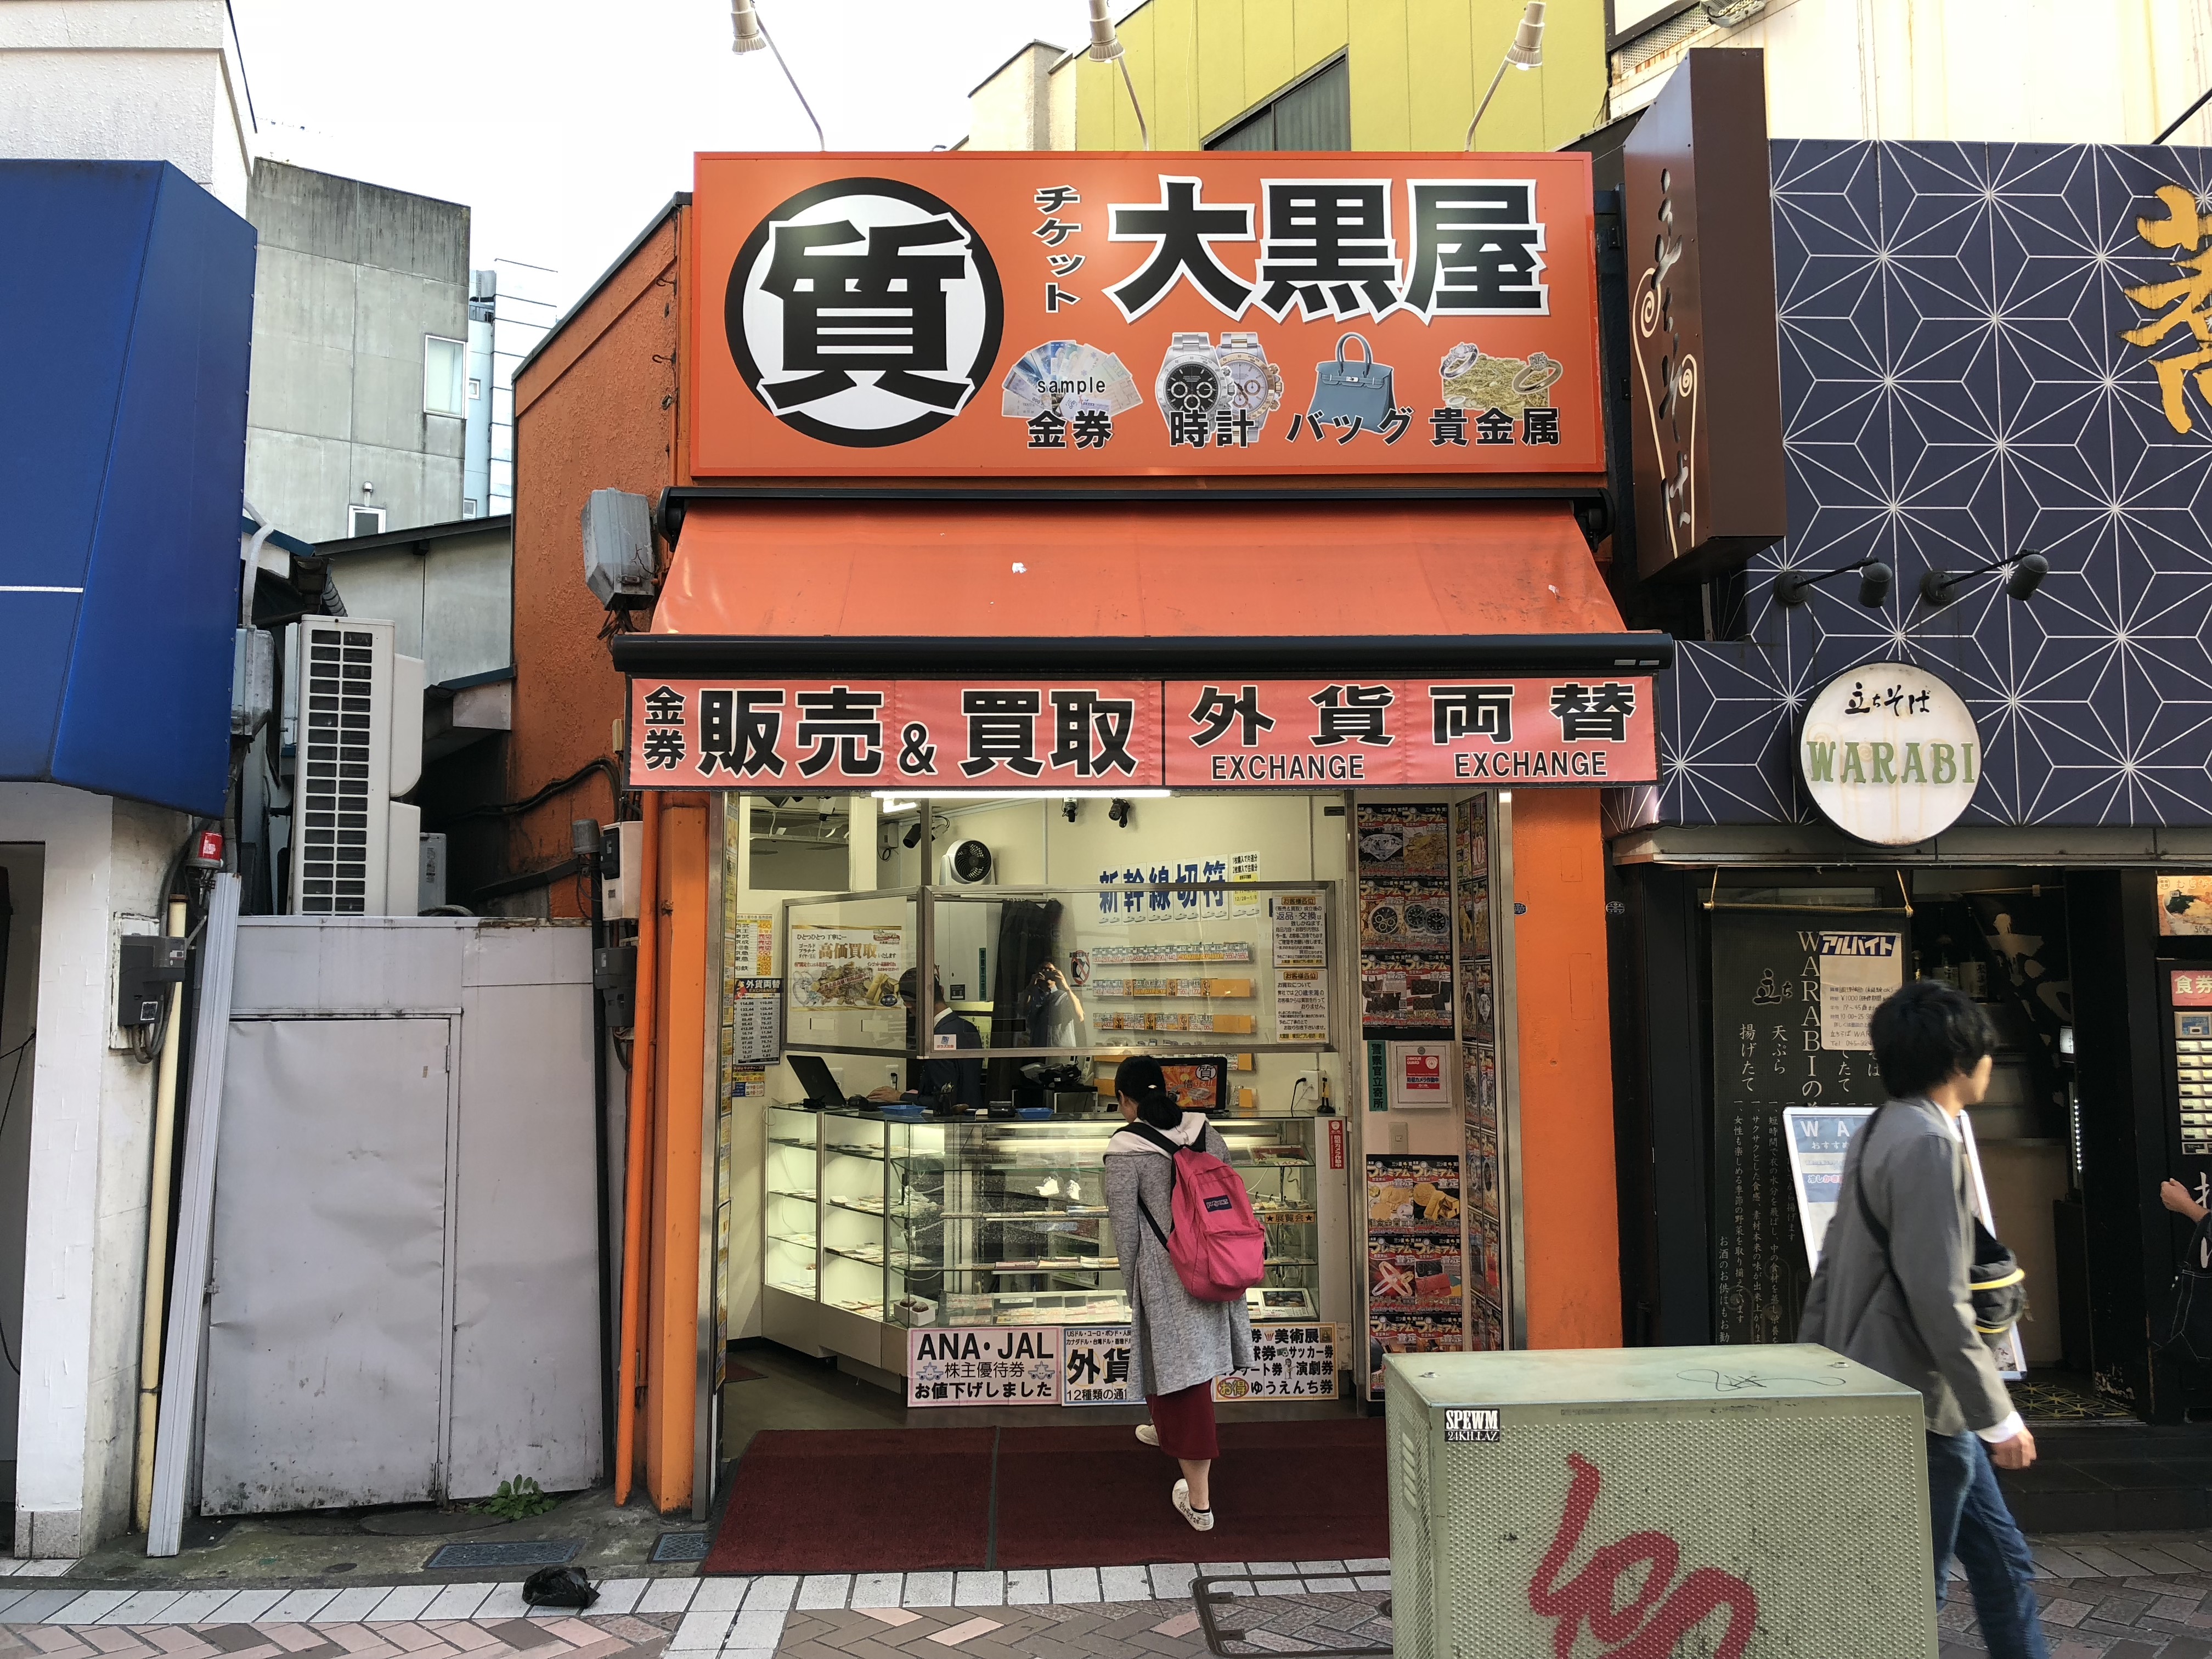 Where is the Best Place to Exchange Dollars for Yen?